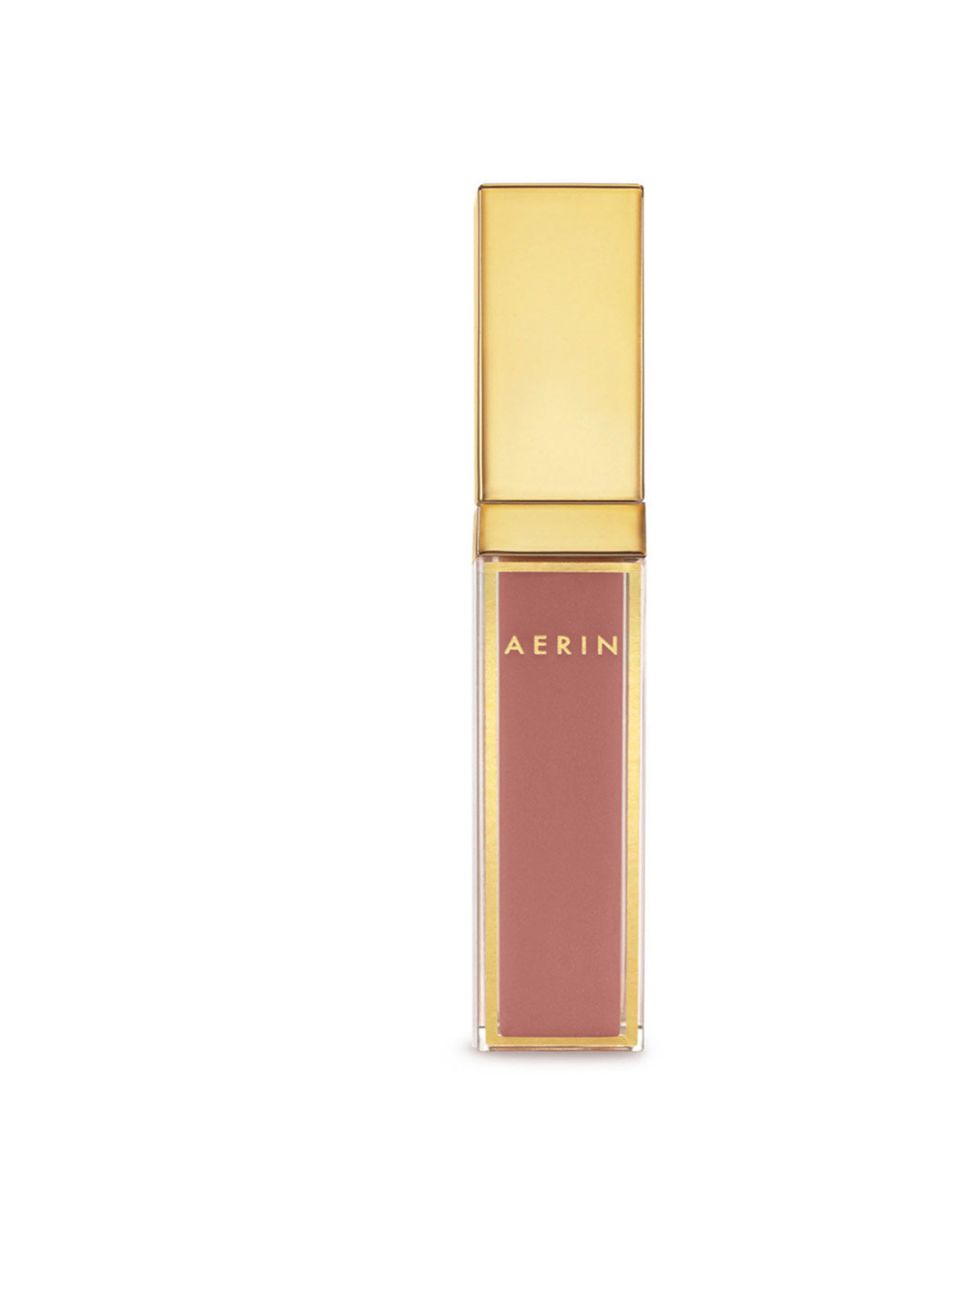 <p><strong>Aerin Lipgloss in Bohemian, £24, available 9th September </strong></p><p>The perfect nude lipgloss that every woman should own. This defined glossy shade will give you a makeover for any occasion, creating a strong, yet subtle look. </p>